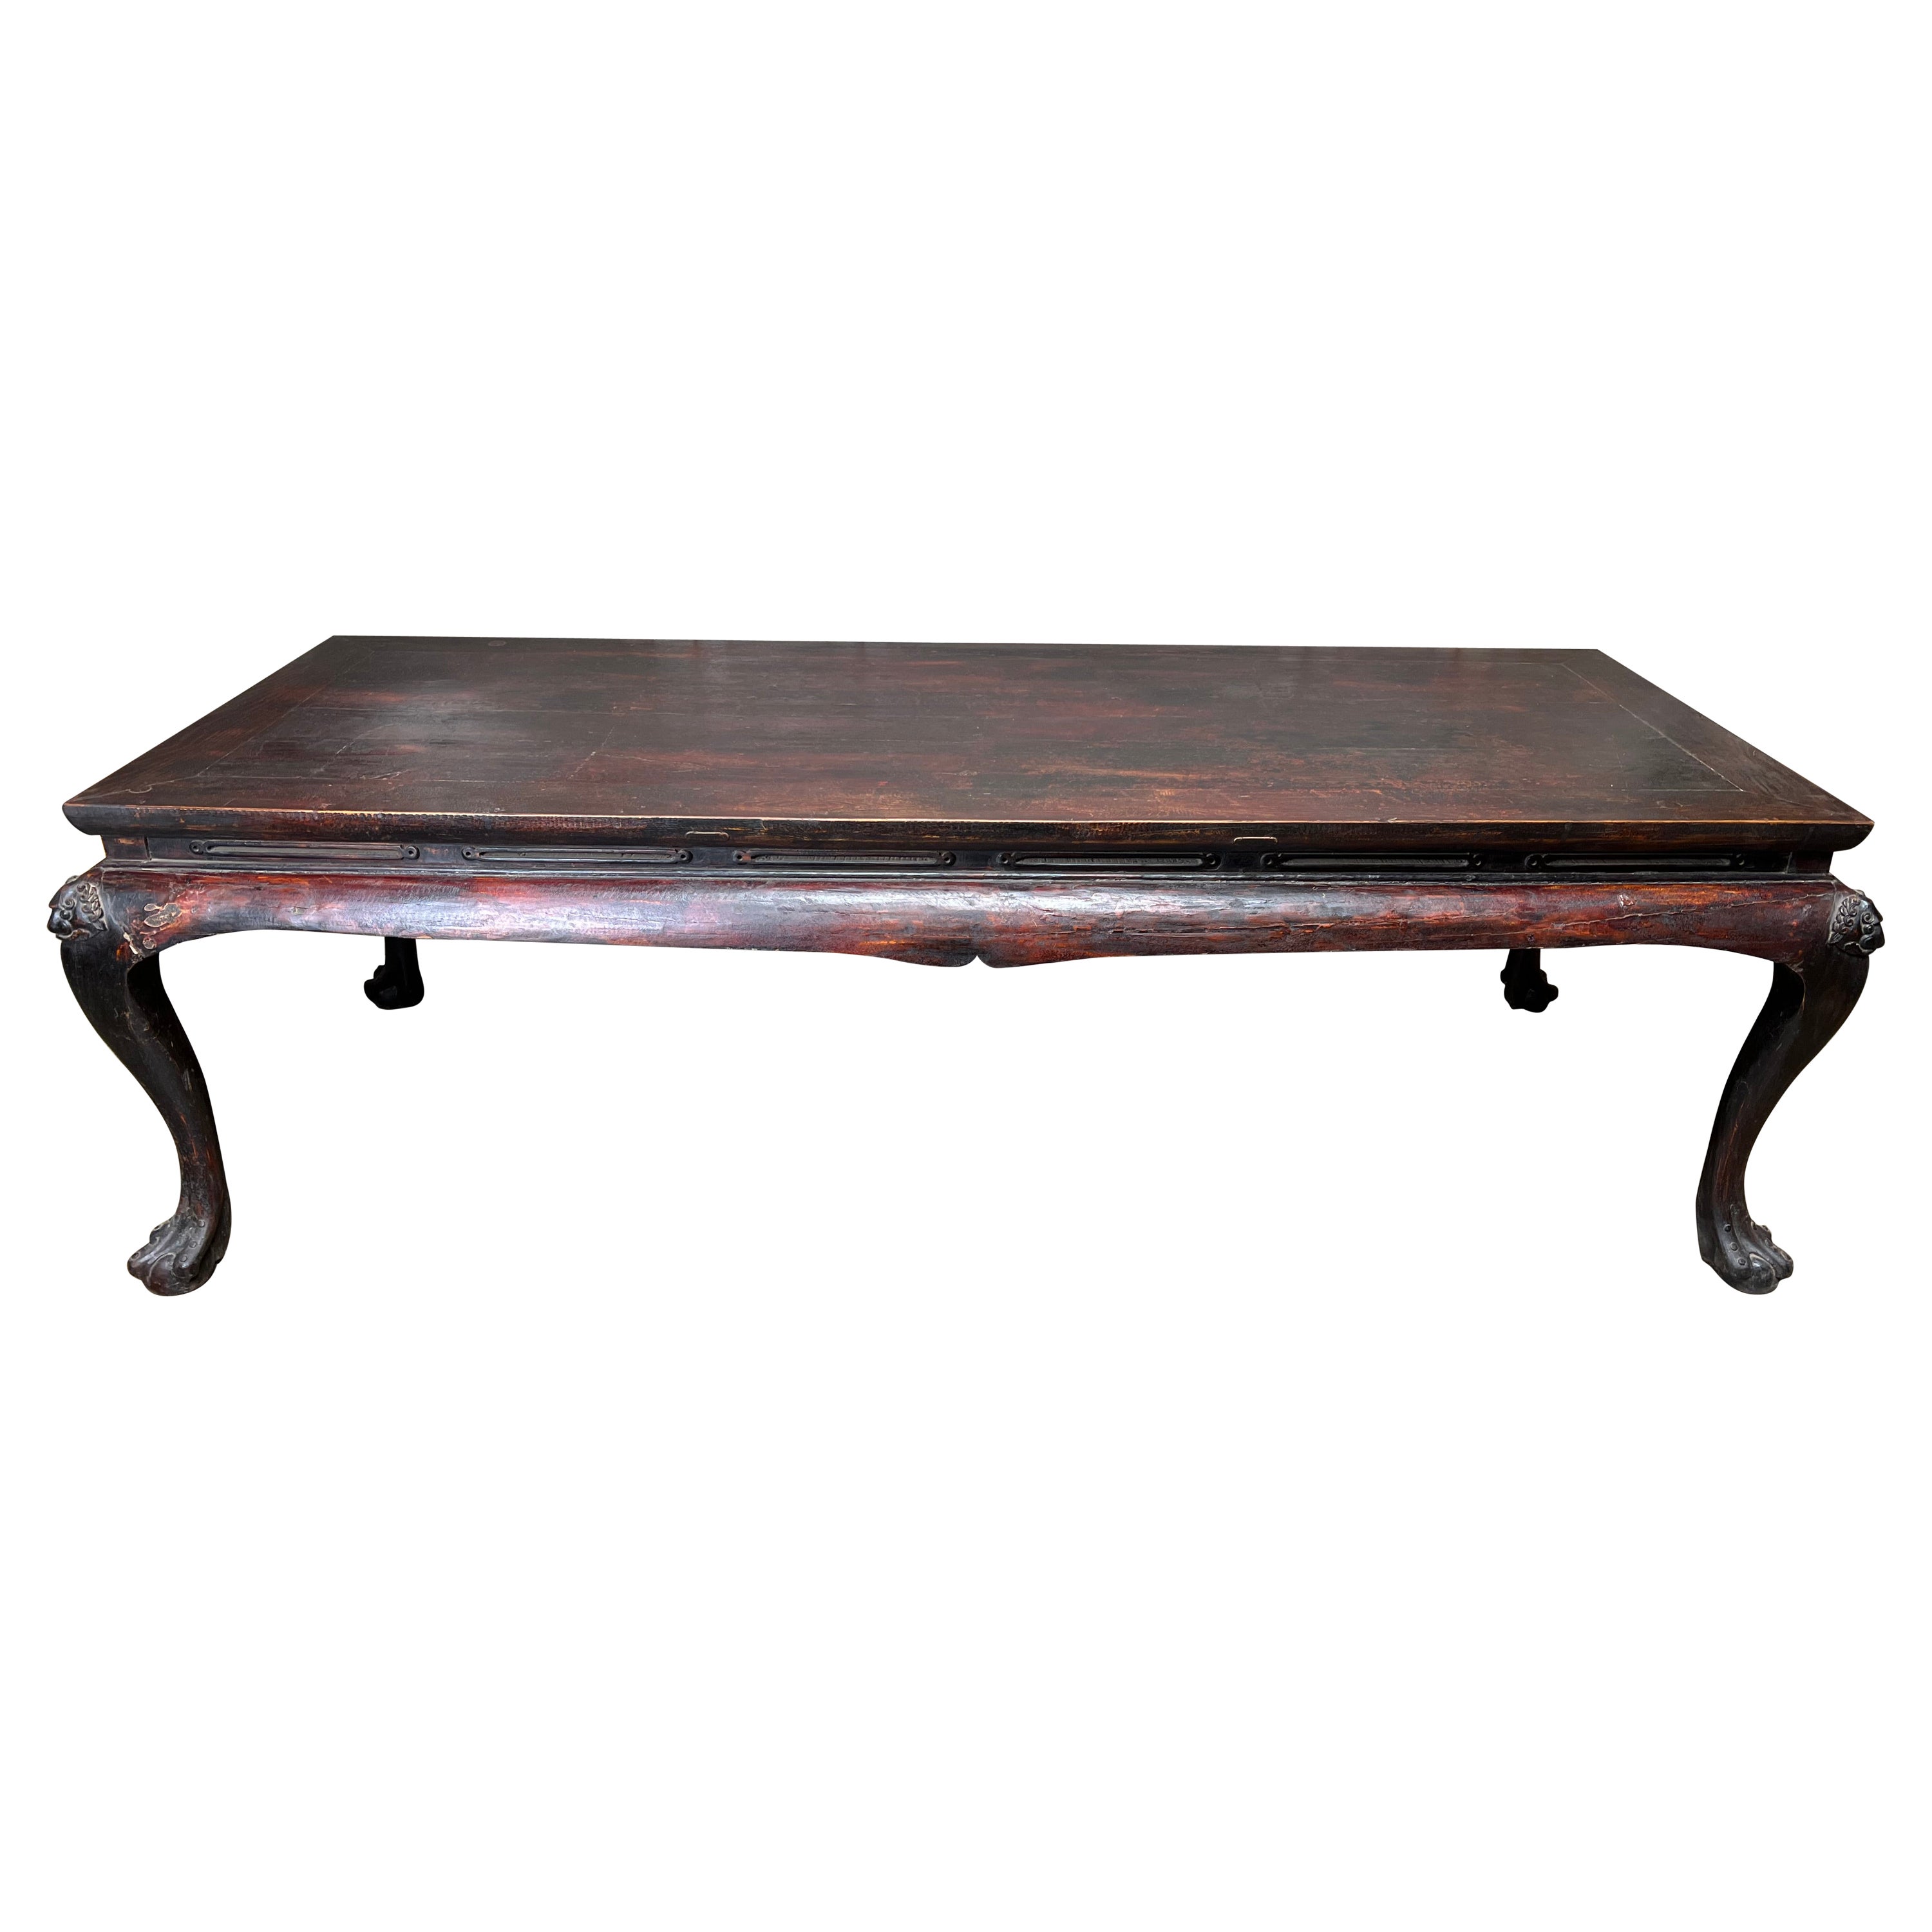 Large 19th Century Elmwood Table with an Old Lacquer Finish